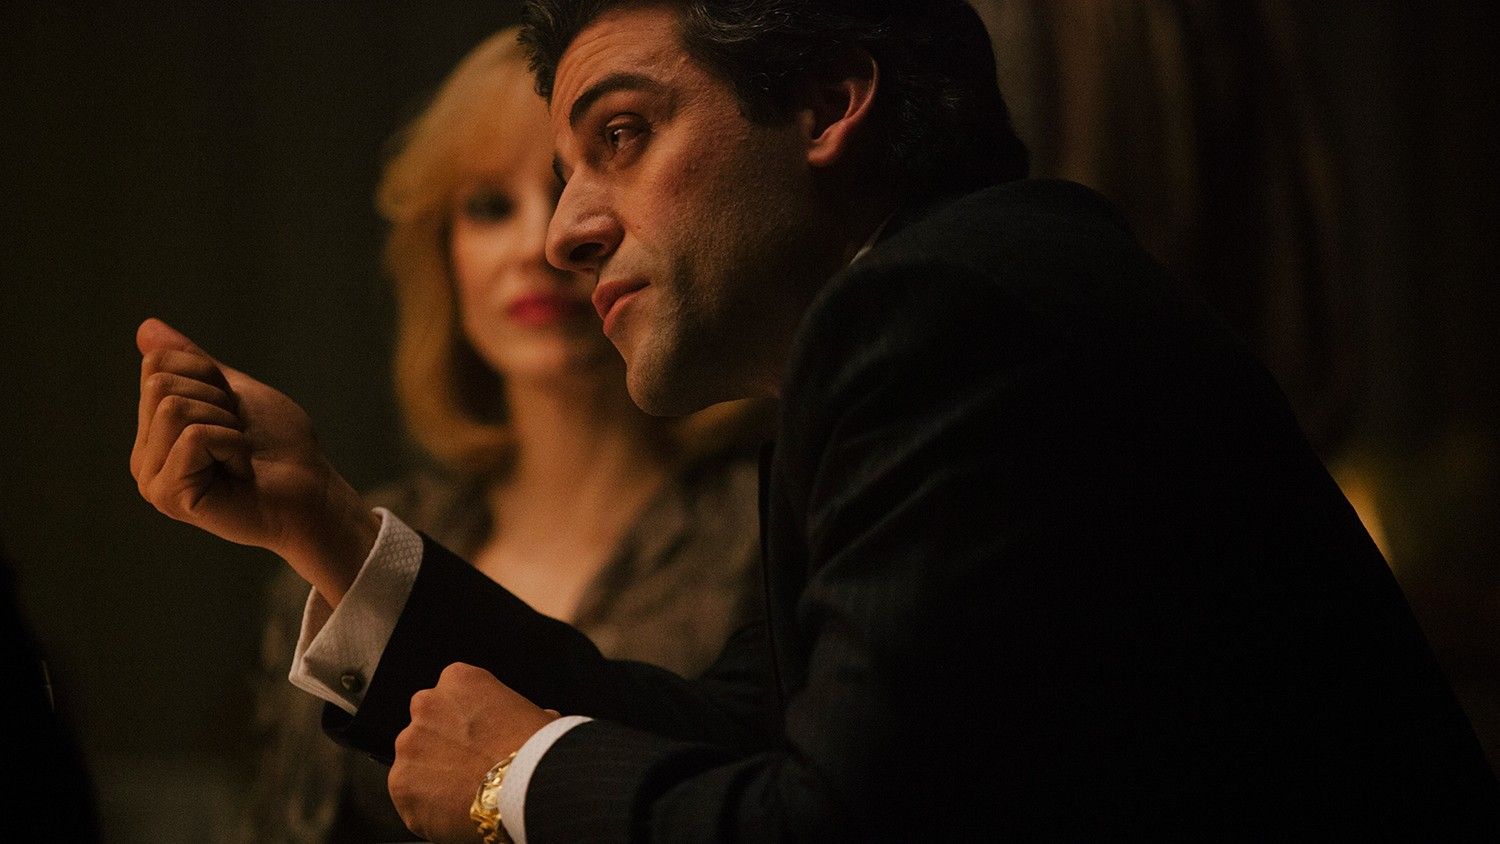 A Most Violent Year Screenplay Available For Your Consideration